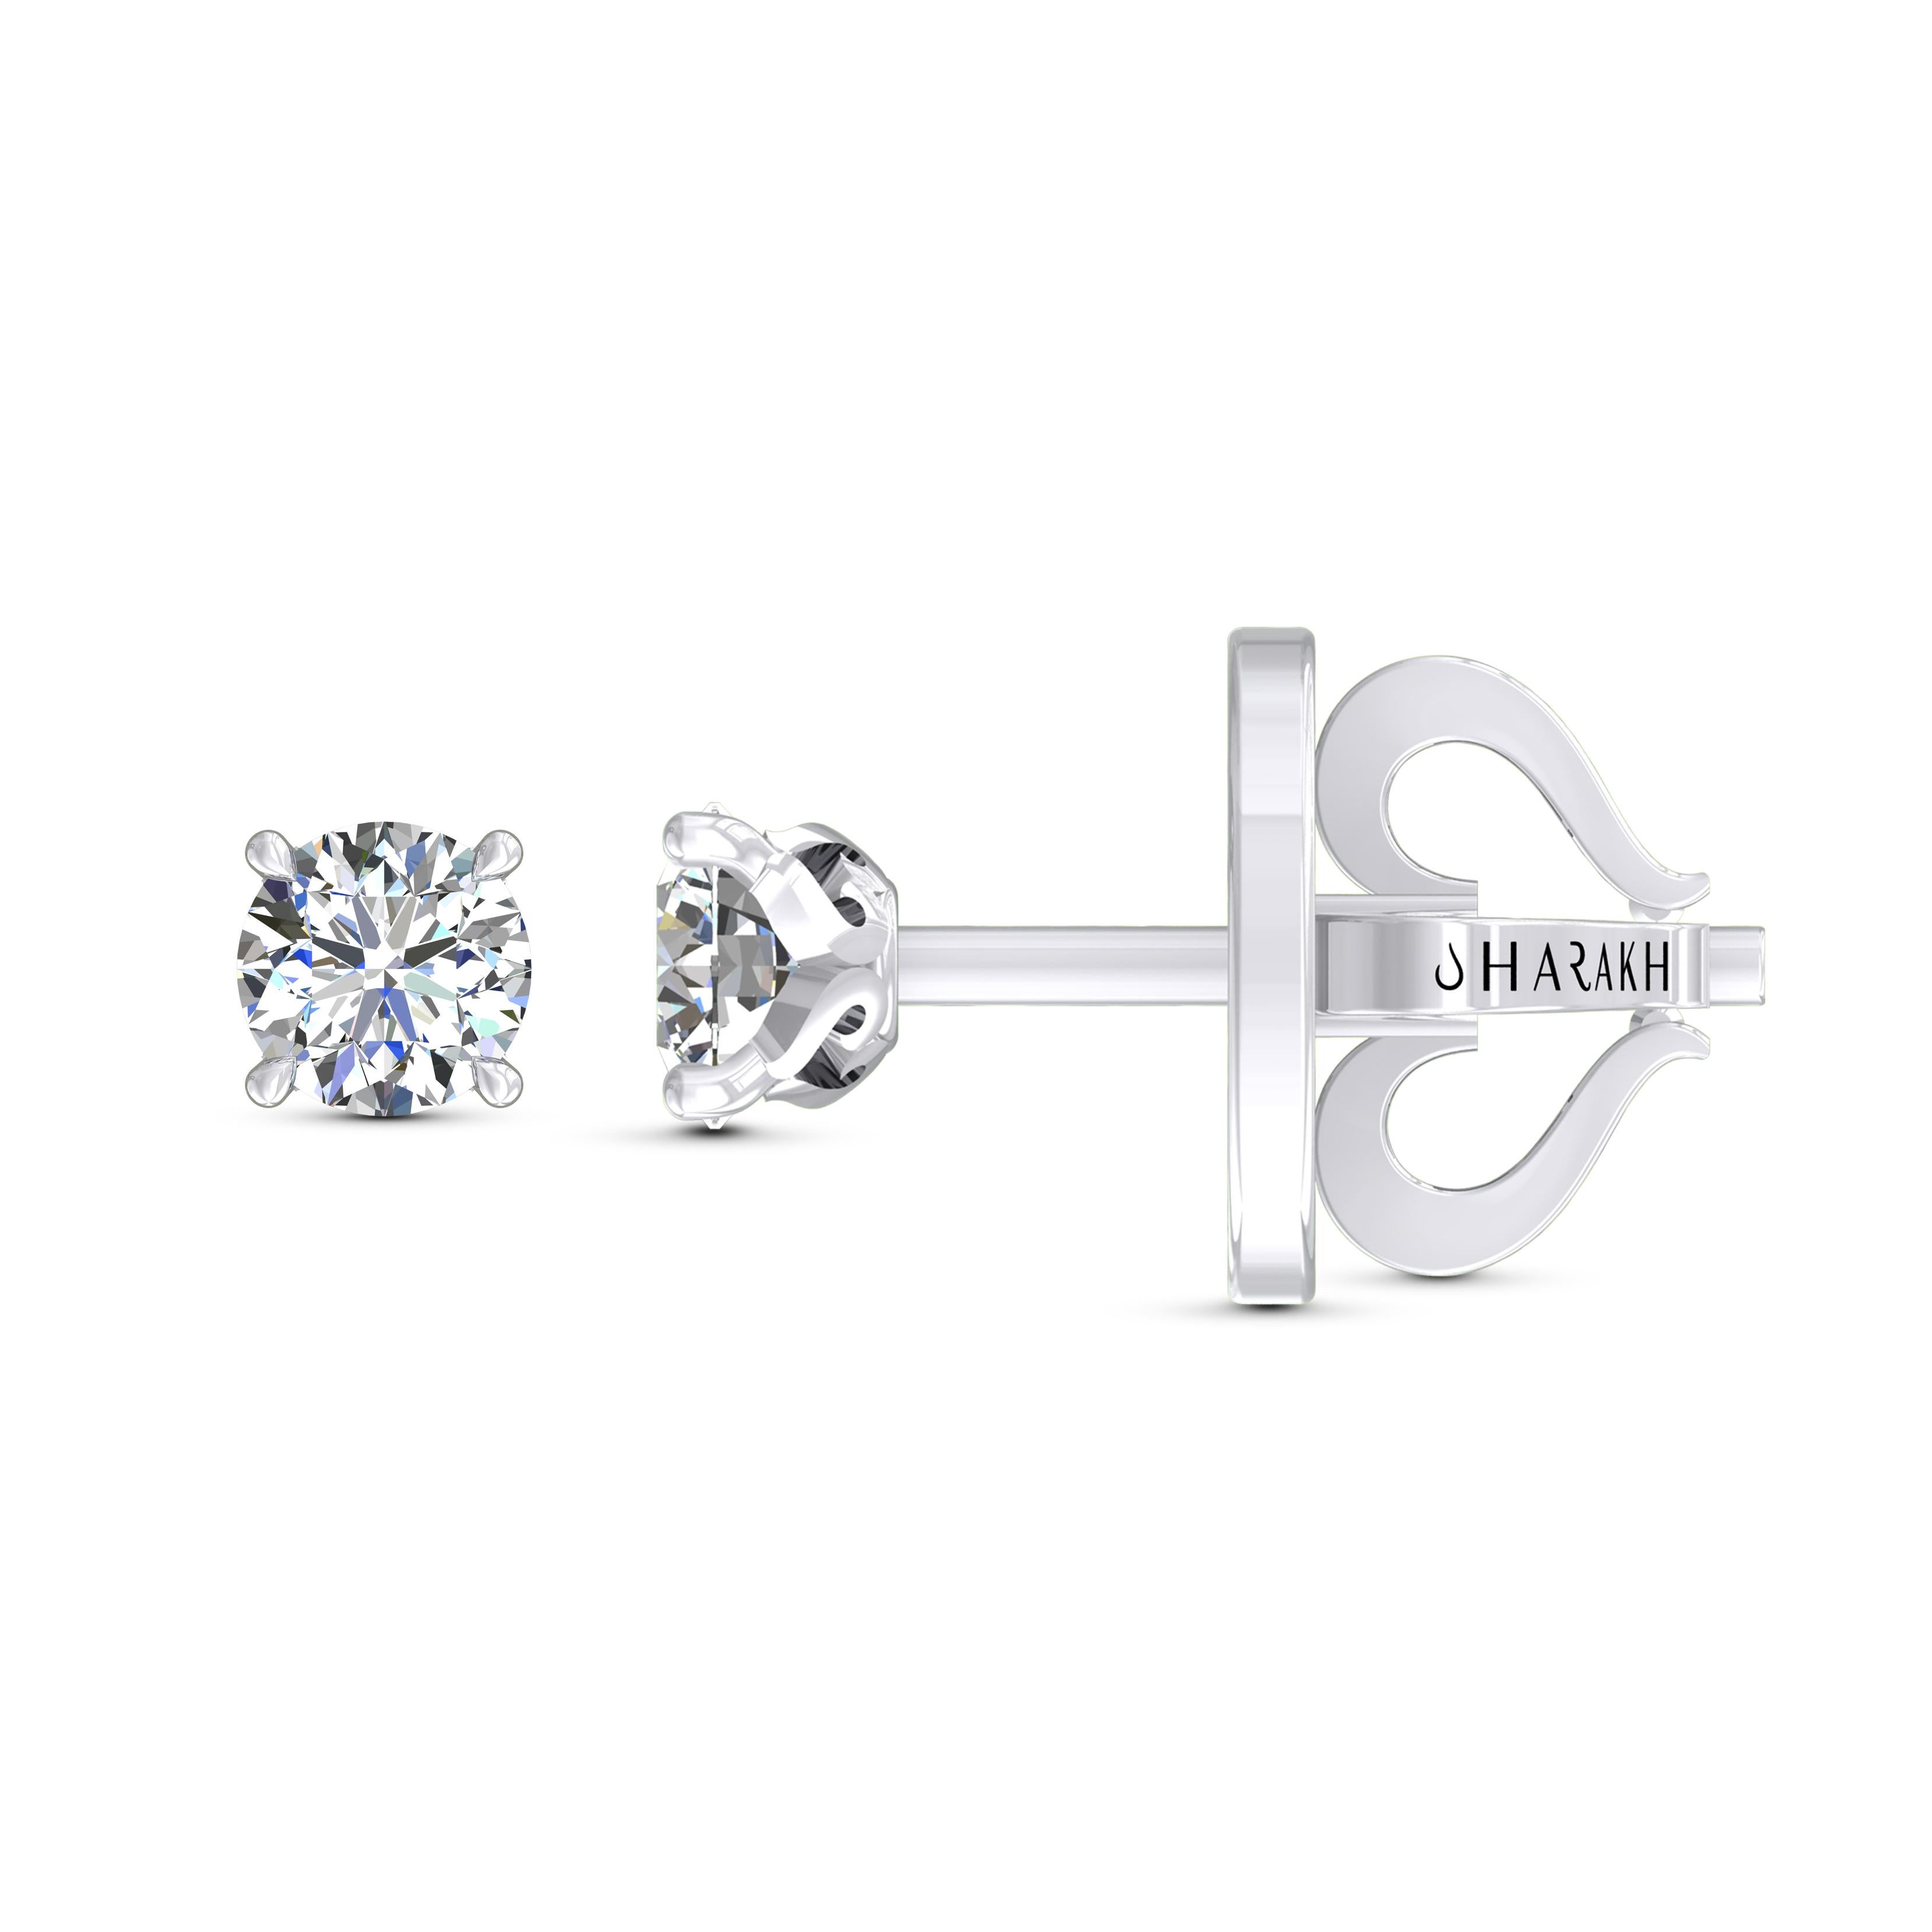 These classic GIA certified diamond studs showcase a pair of perfectly matched diamonds weighing total 2.00 carats. Crafted in 18 karat rose gold, these four prong earrings are available in rose and yellow gold as well.

Perfect for gifting and for